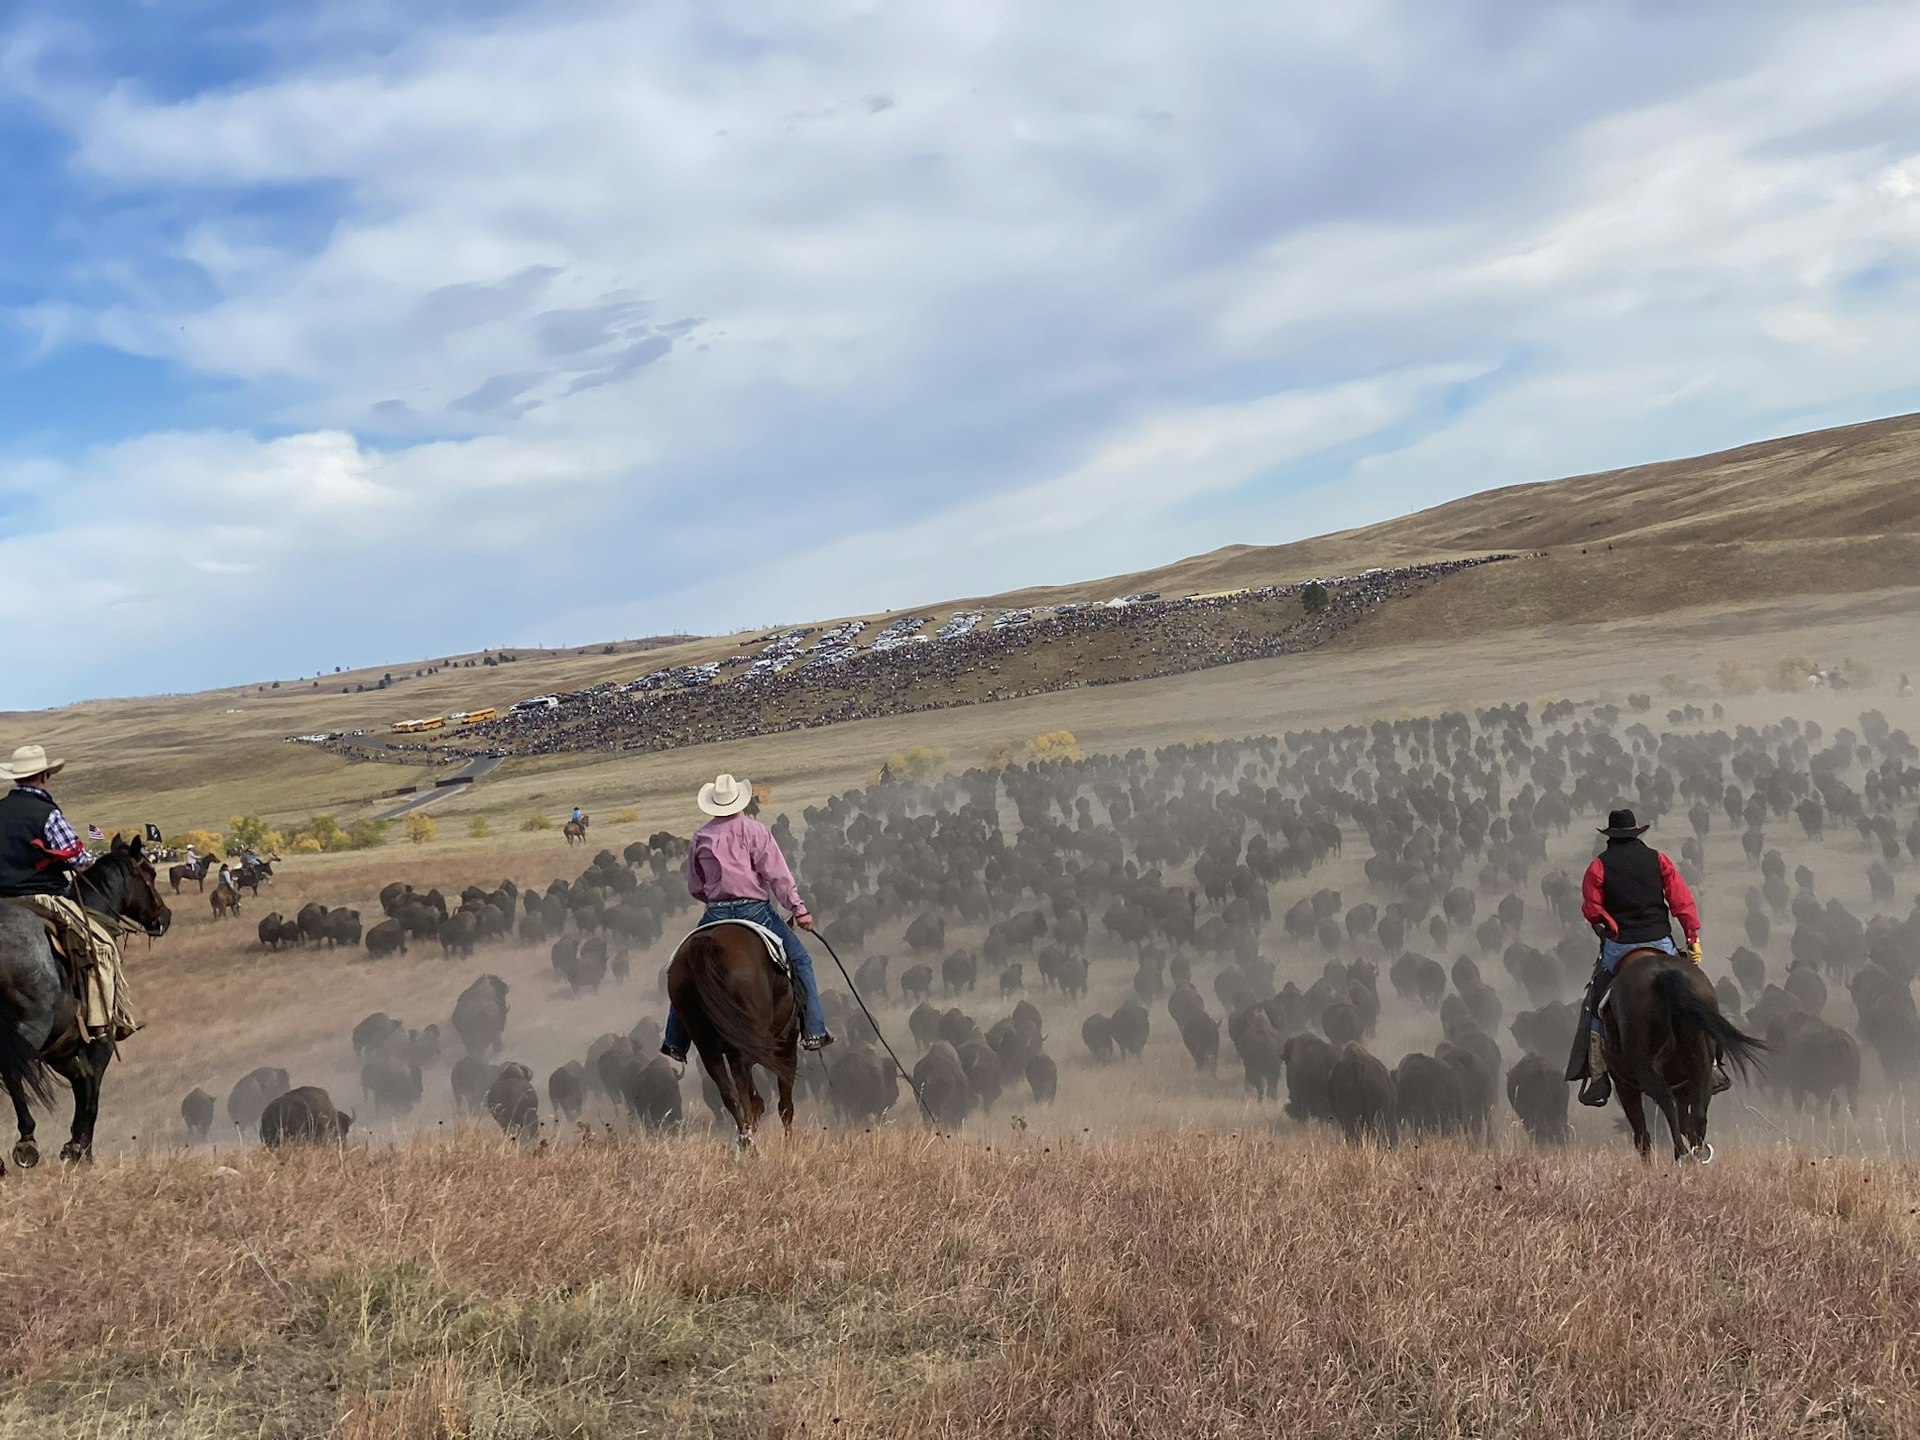 Horseback cowboys drive bison together into a herd while spectators gather on a distant hillside